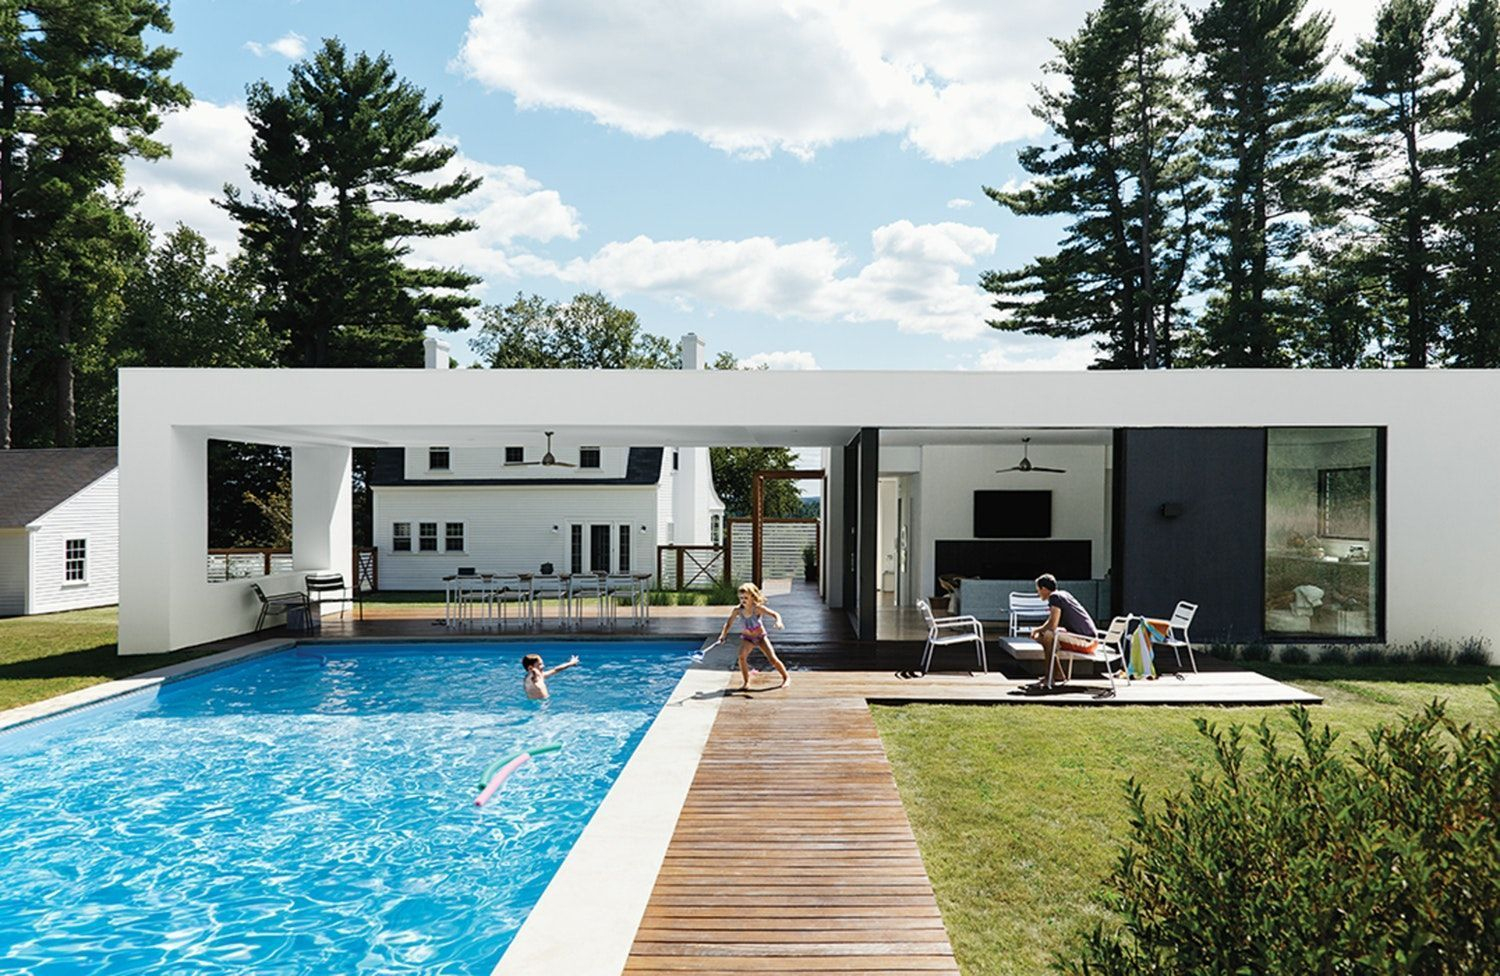 The 1,000-Square-Foot Modern Pool House That's Actually Just ... à Pool House Moderne En Kit